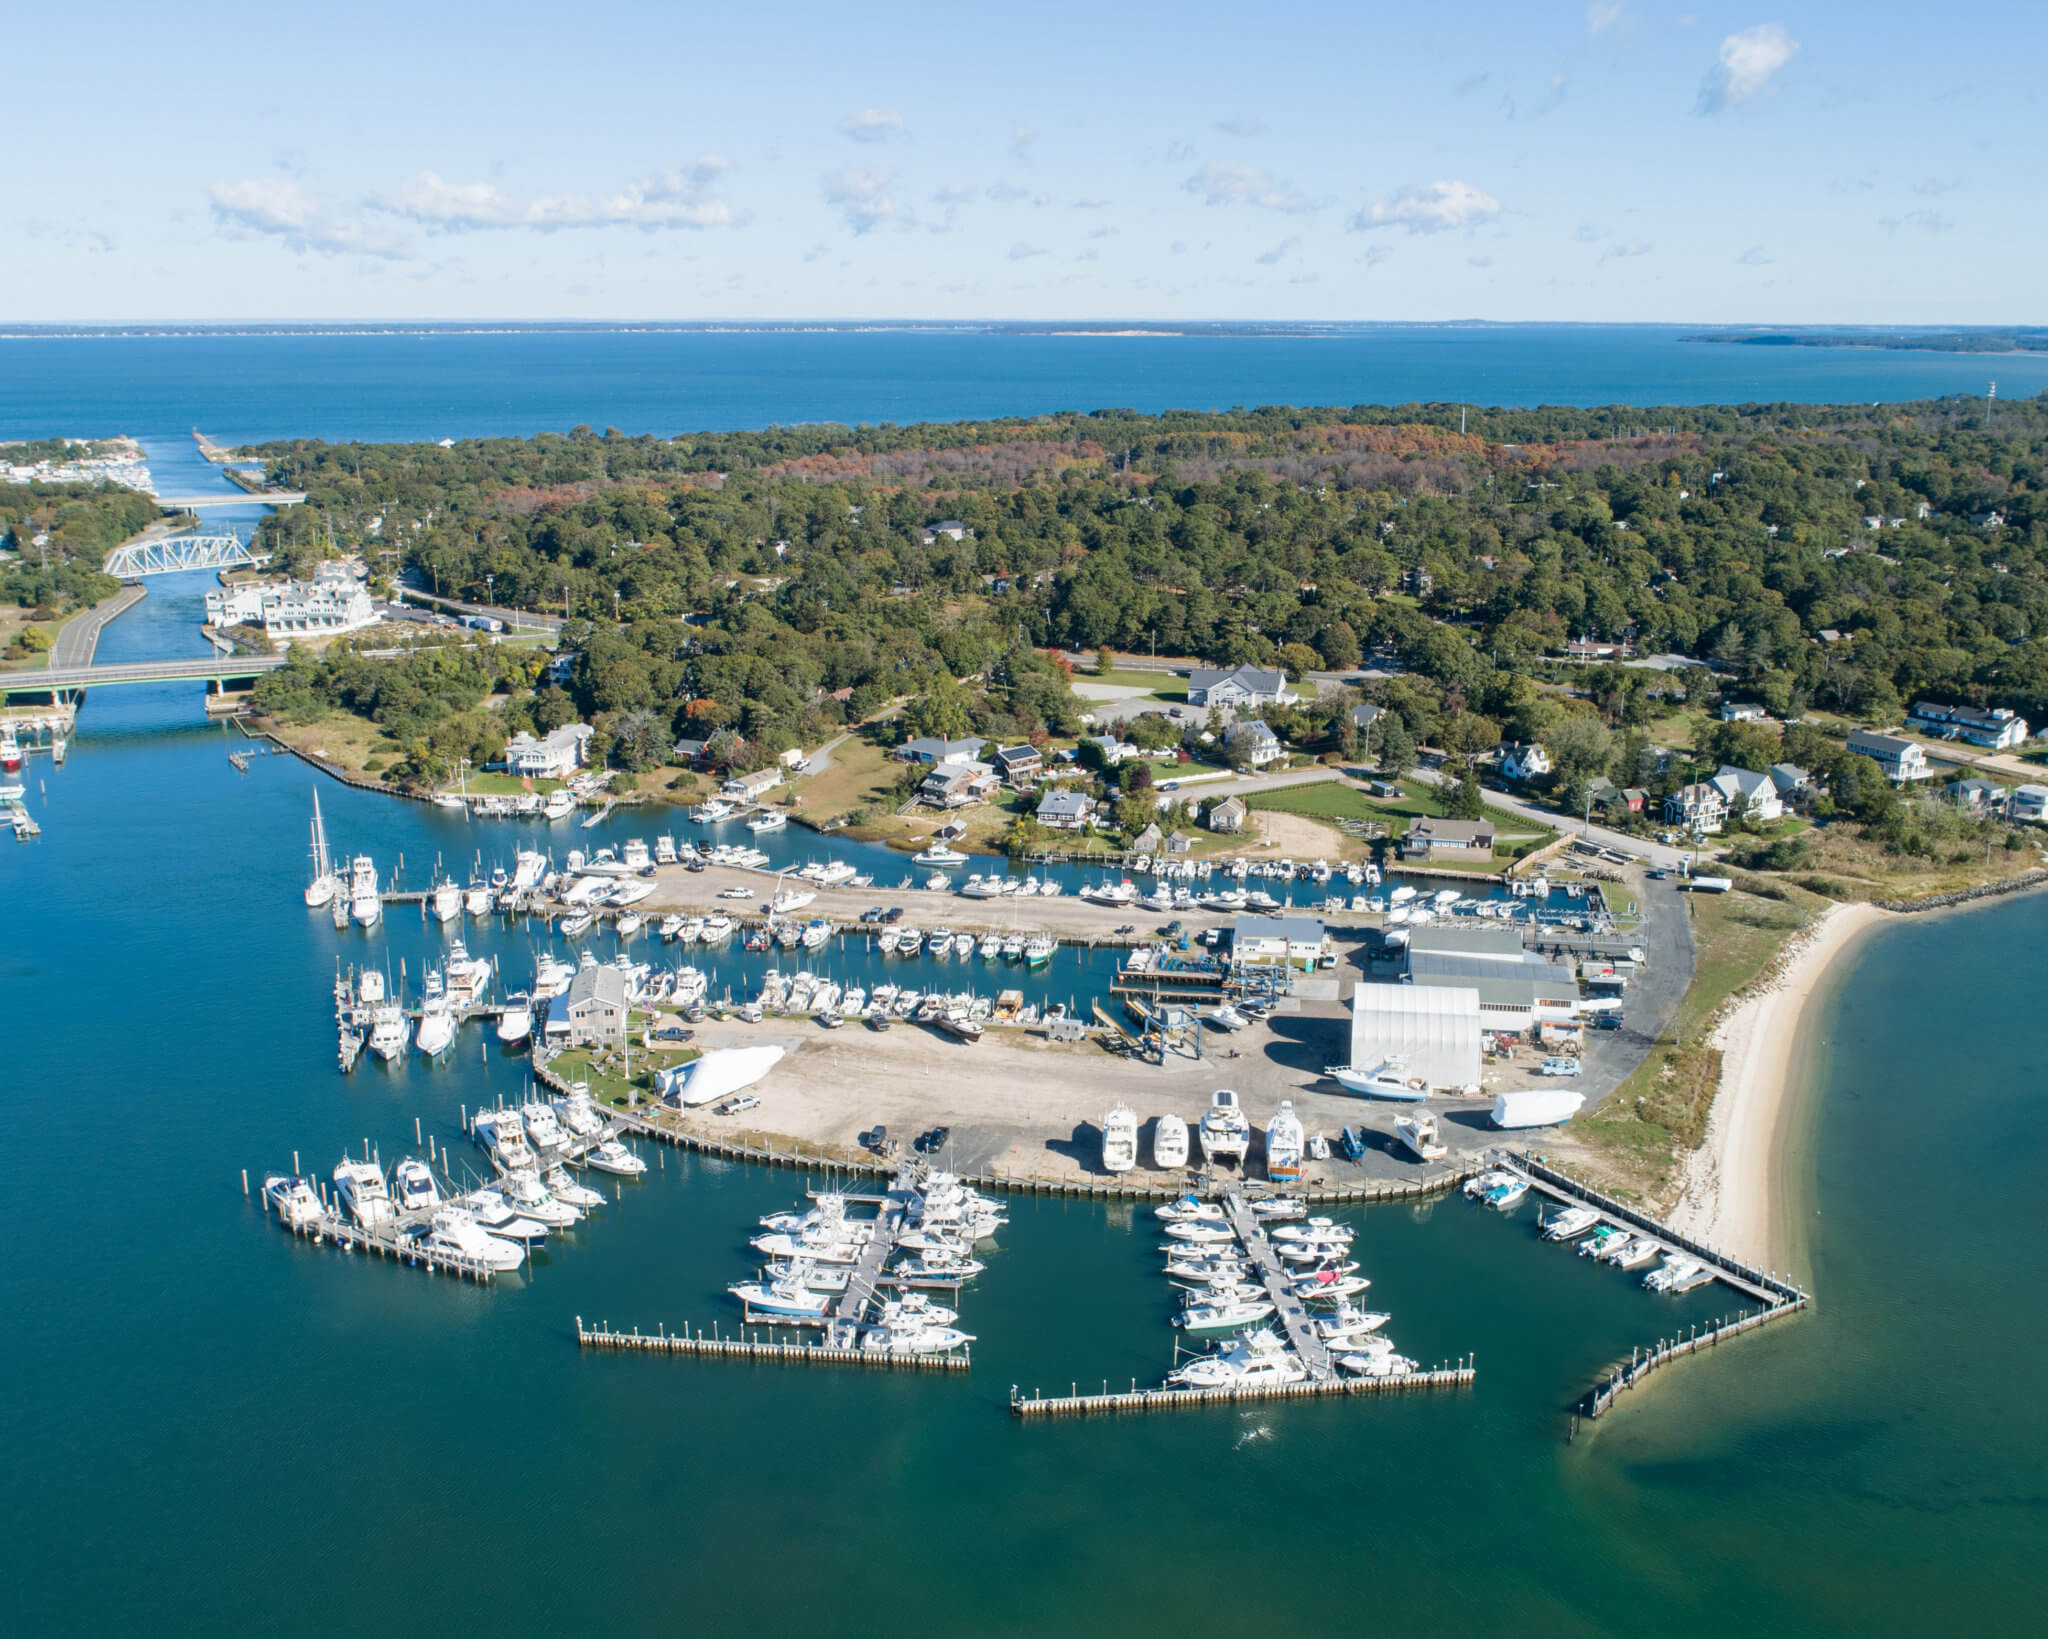 Shagwong Marina—Southampton, formerly Prime Marina Southampton, is one of three new marinas EHP Hospitality Group has purchased on the East End of Long Island.